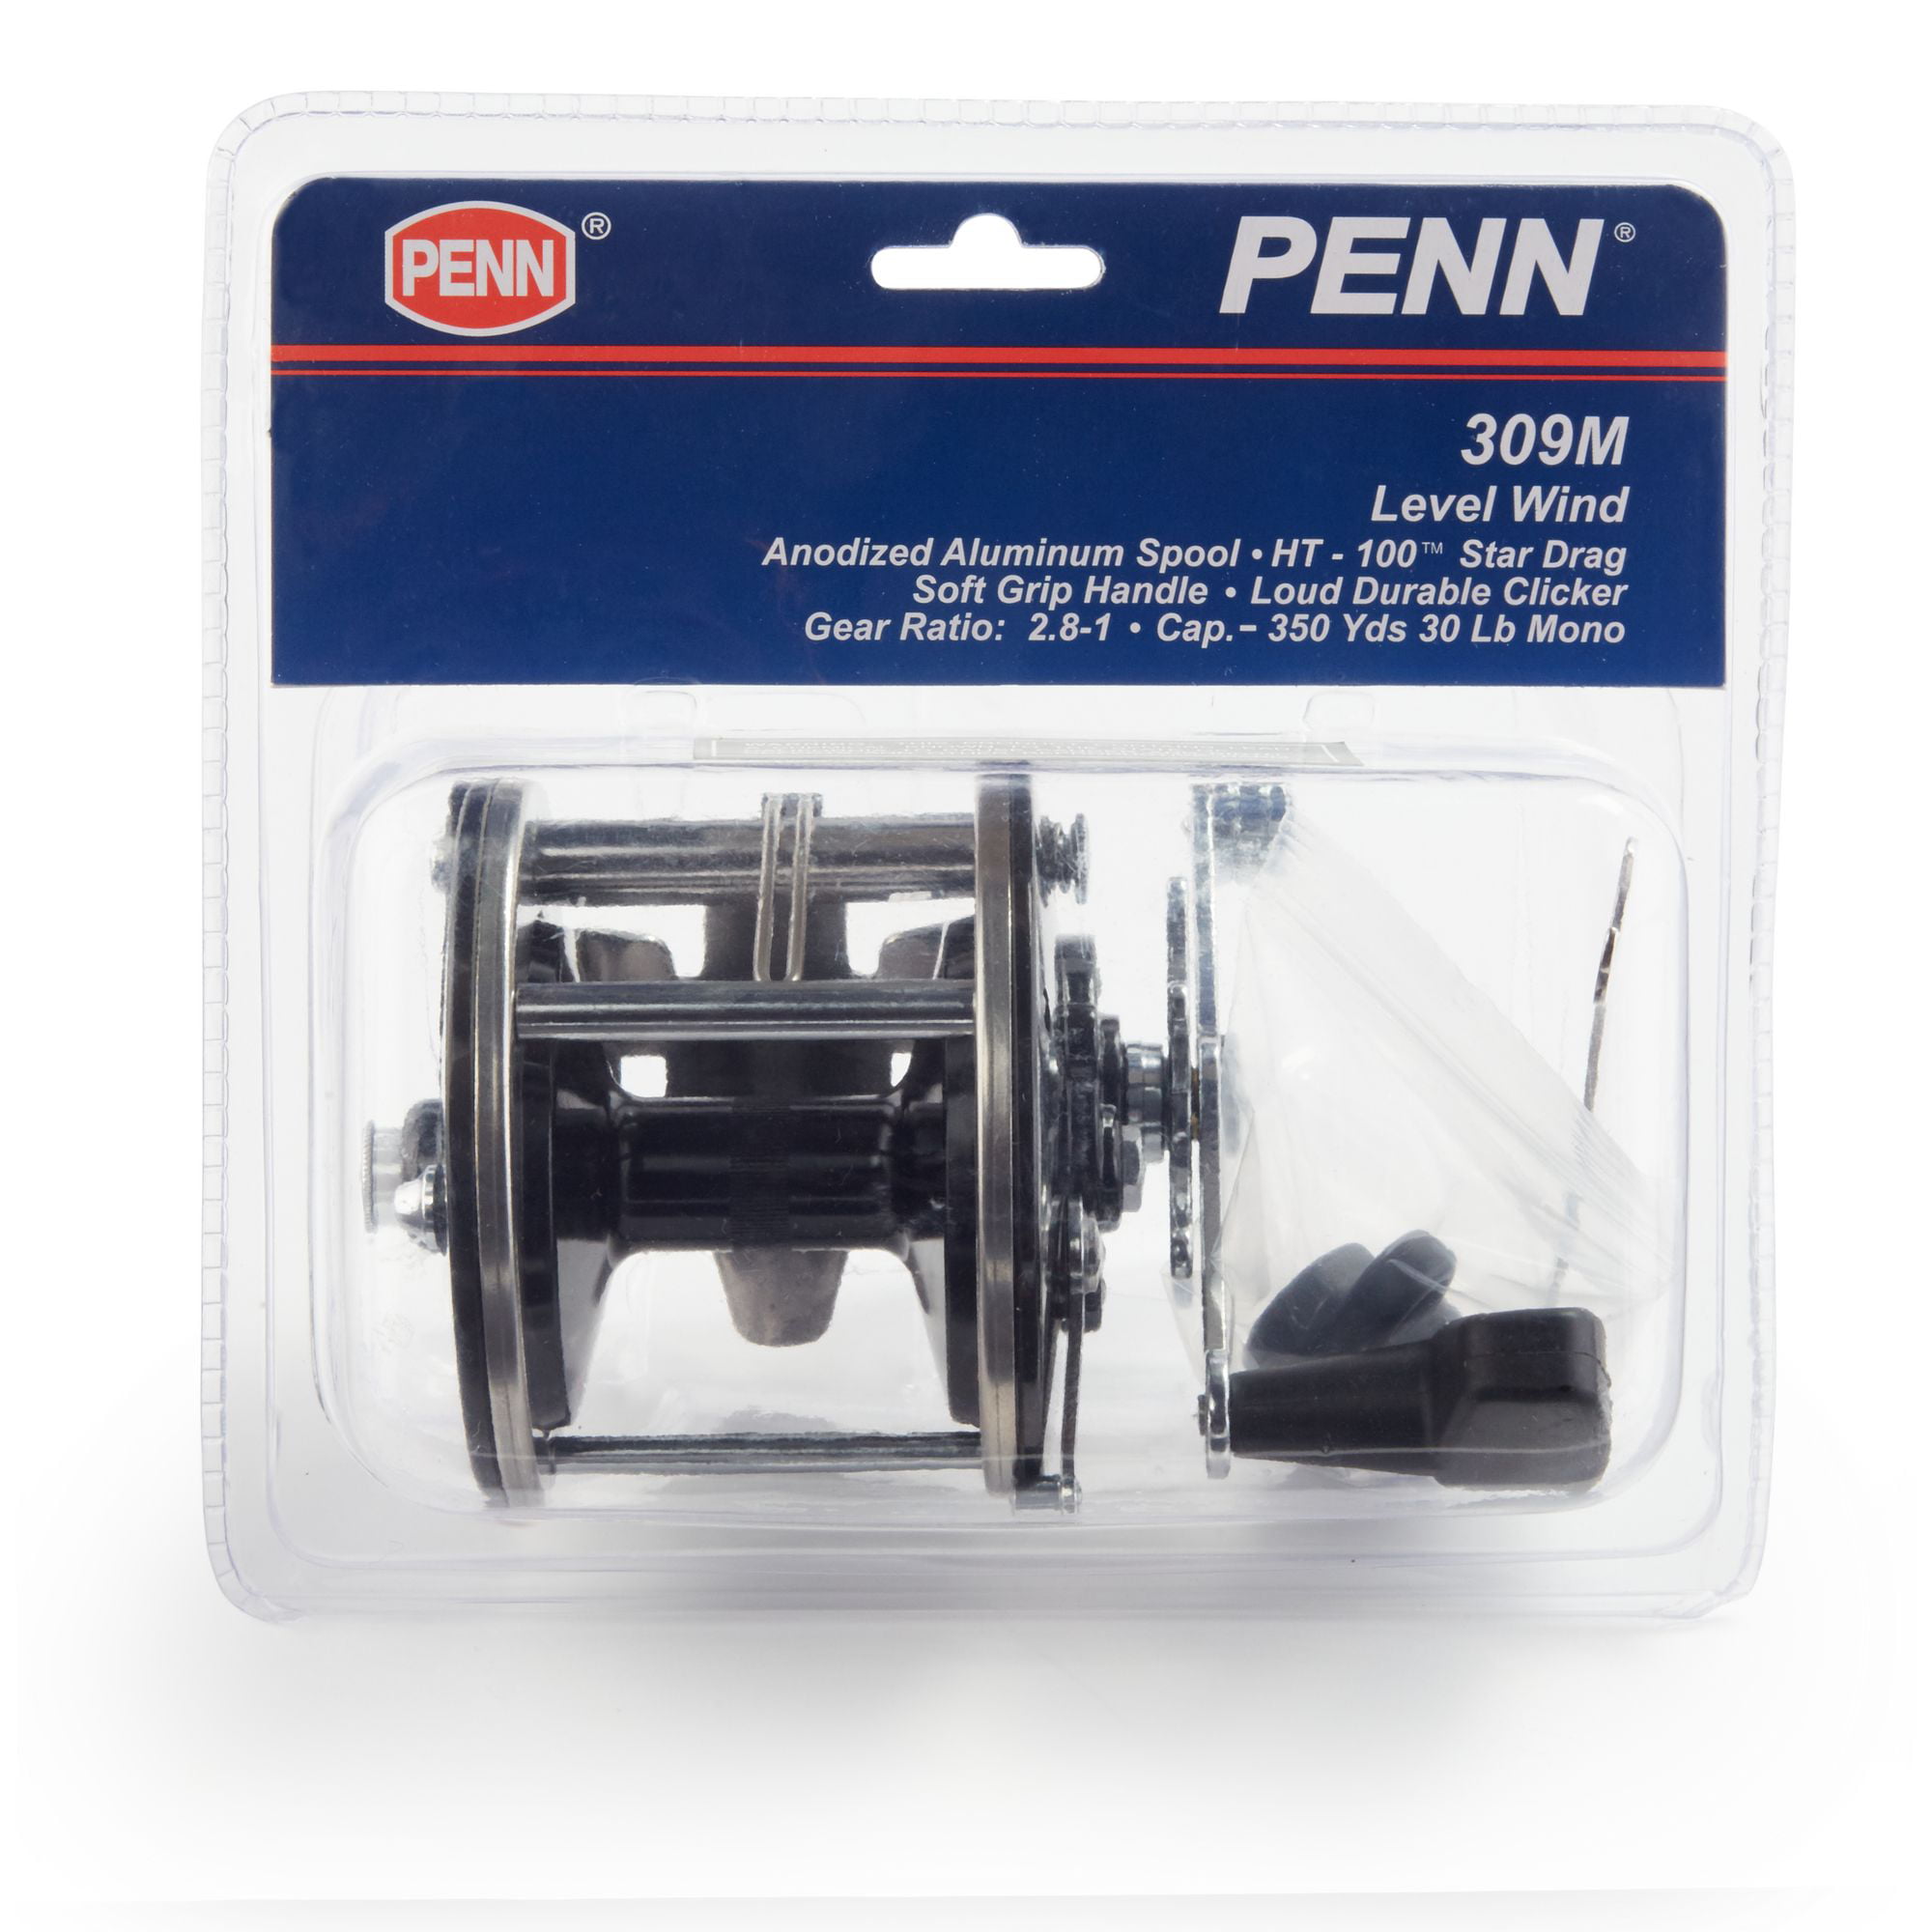 PENN General Purpose Level Wind Conventional Fishing Reel, Size